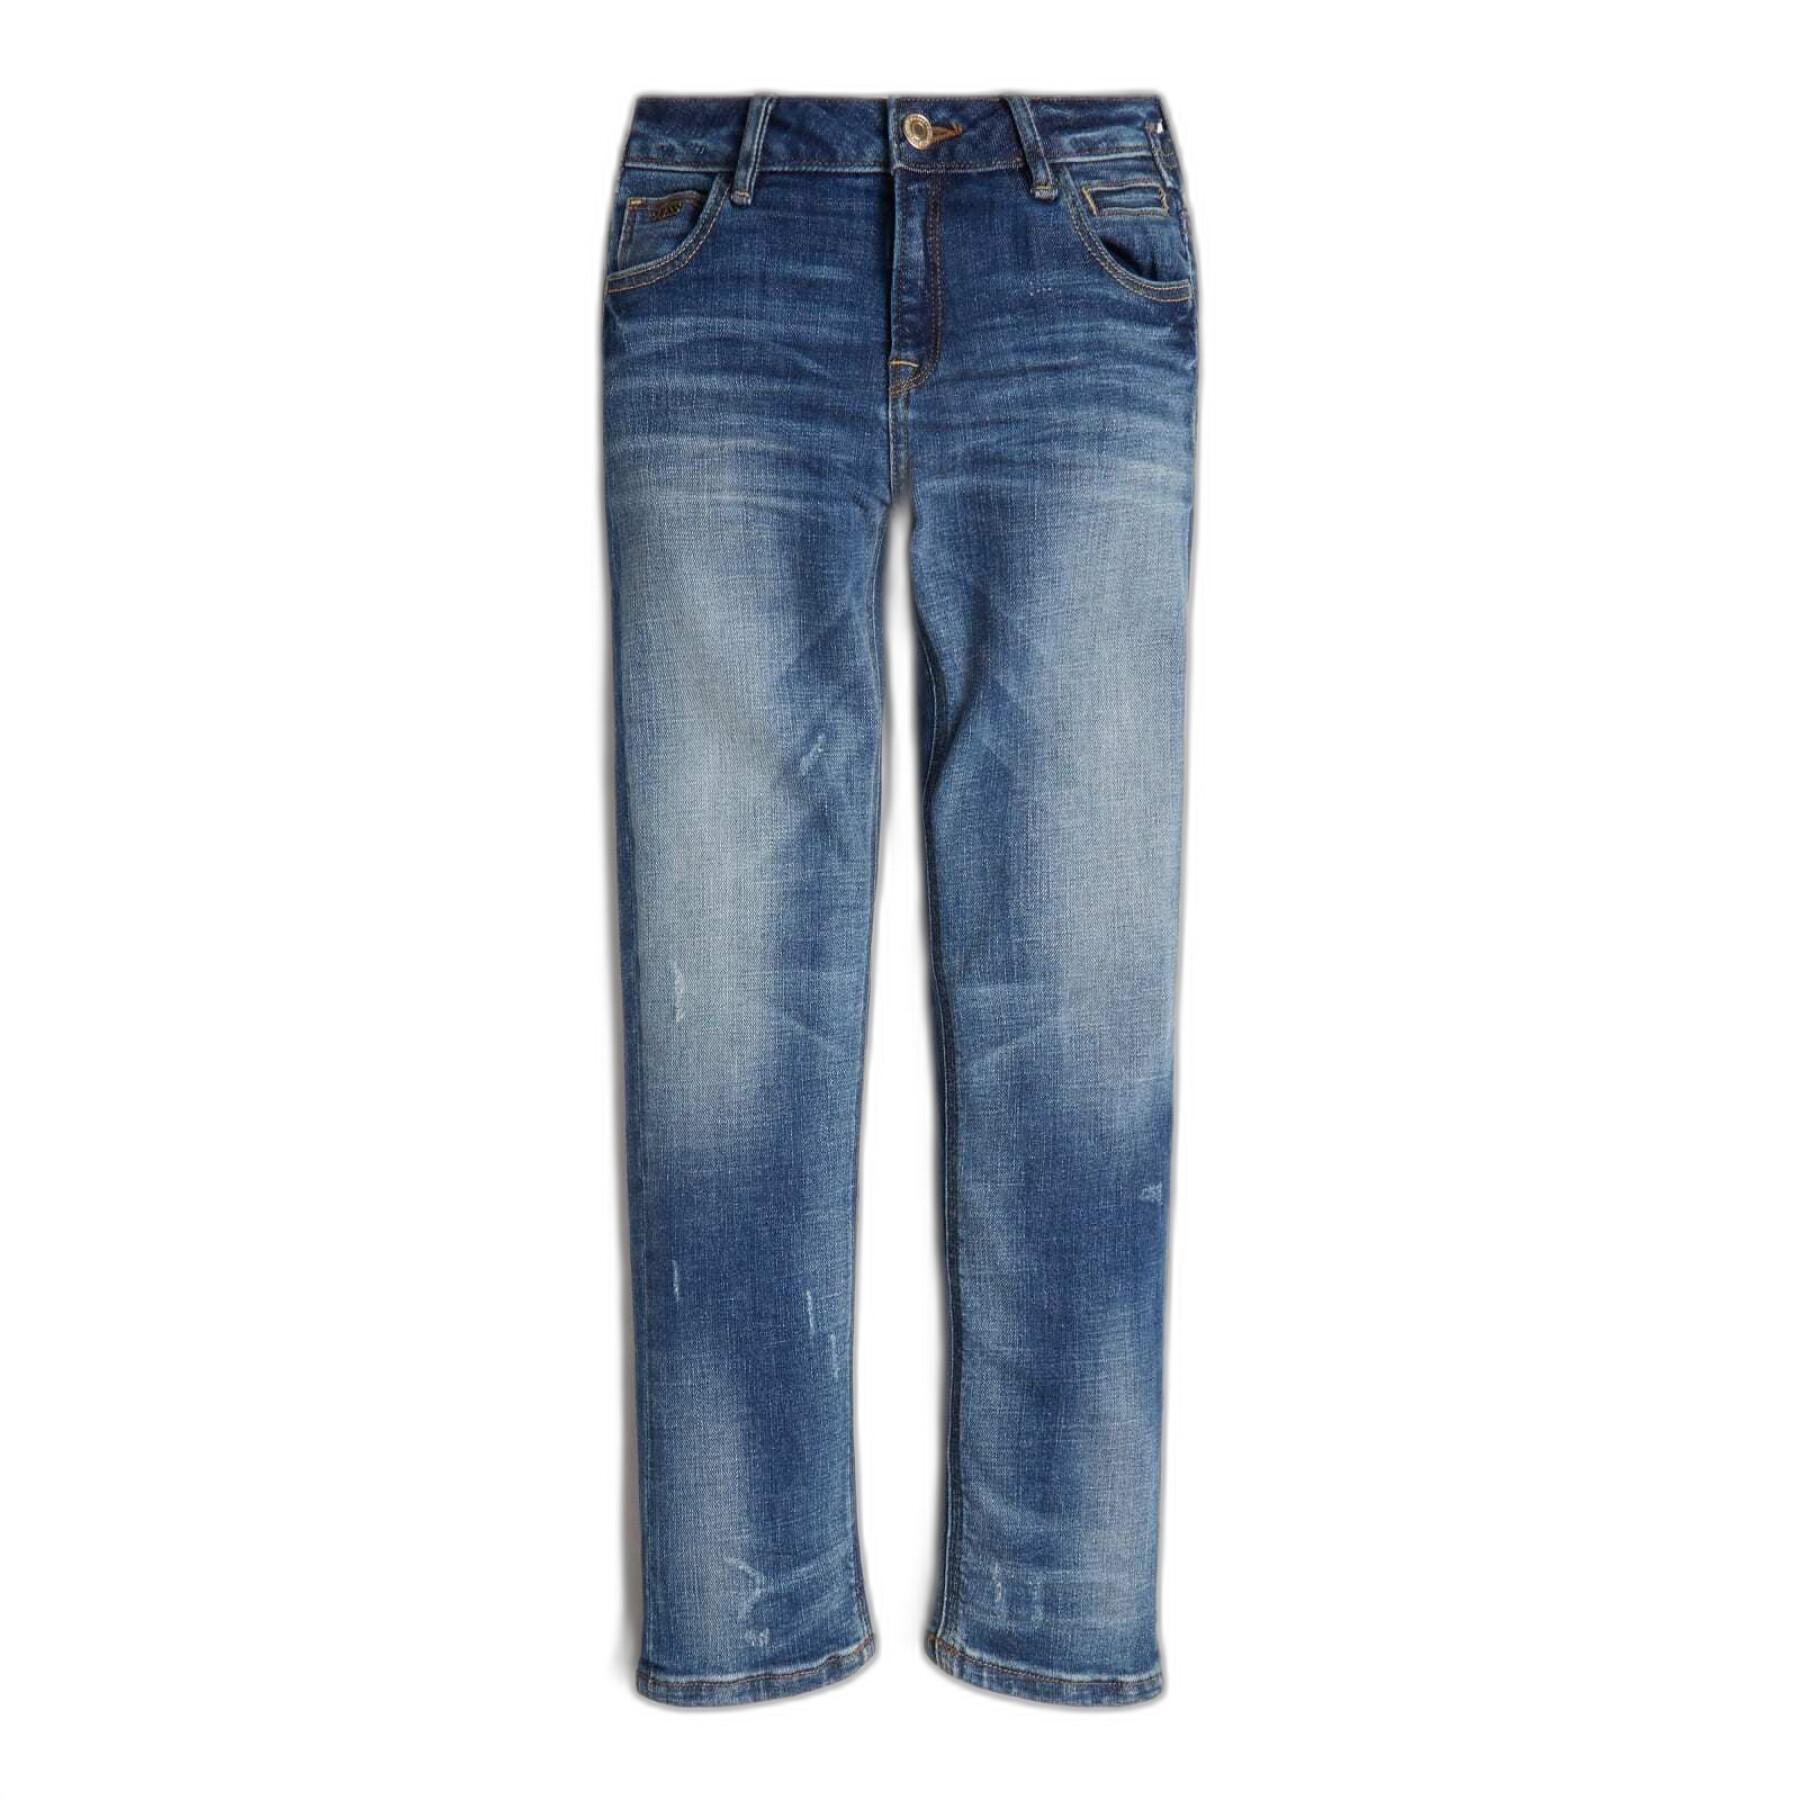 Jeans oversize per bambini Guess